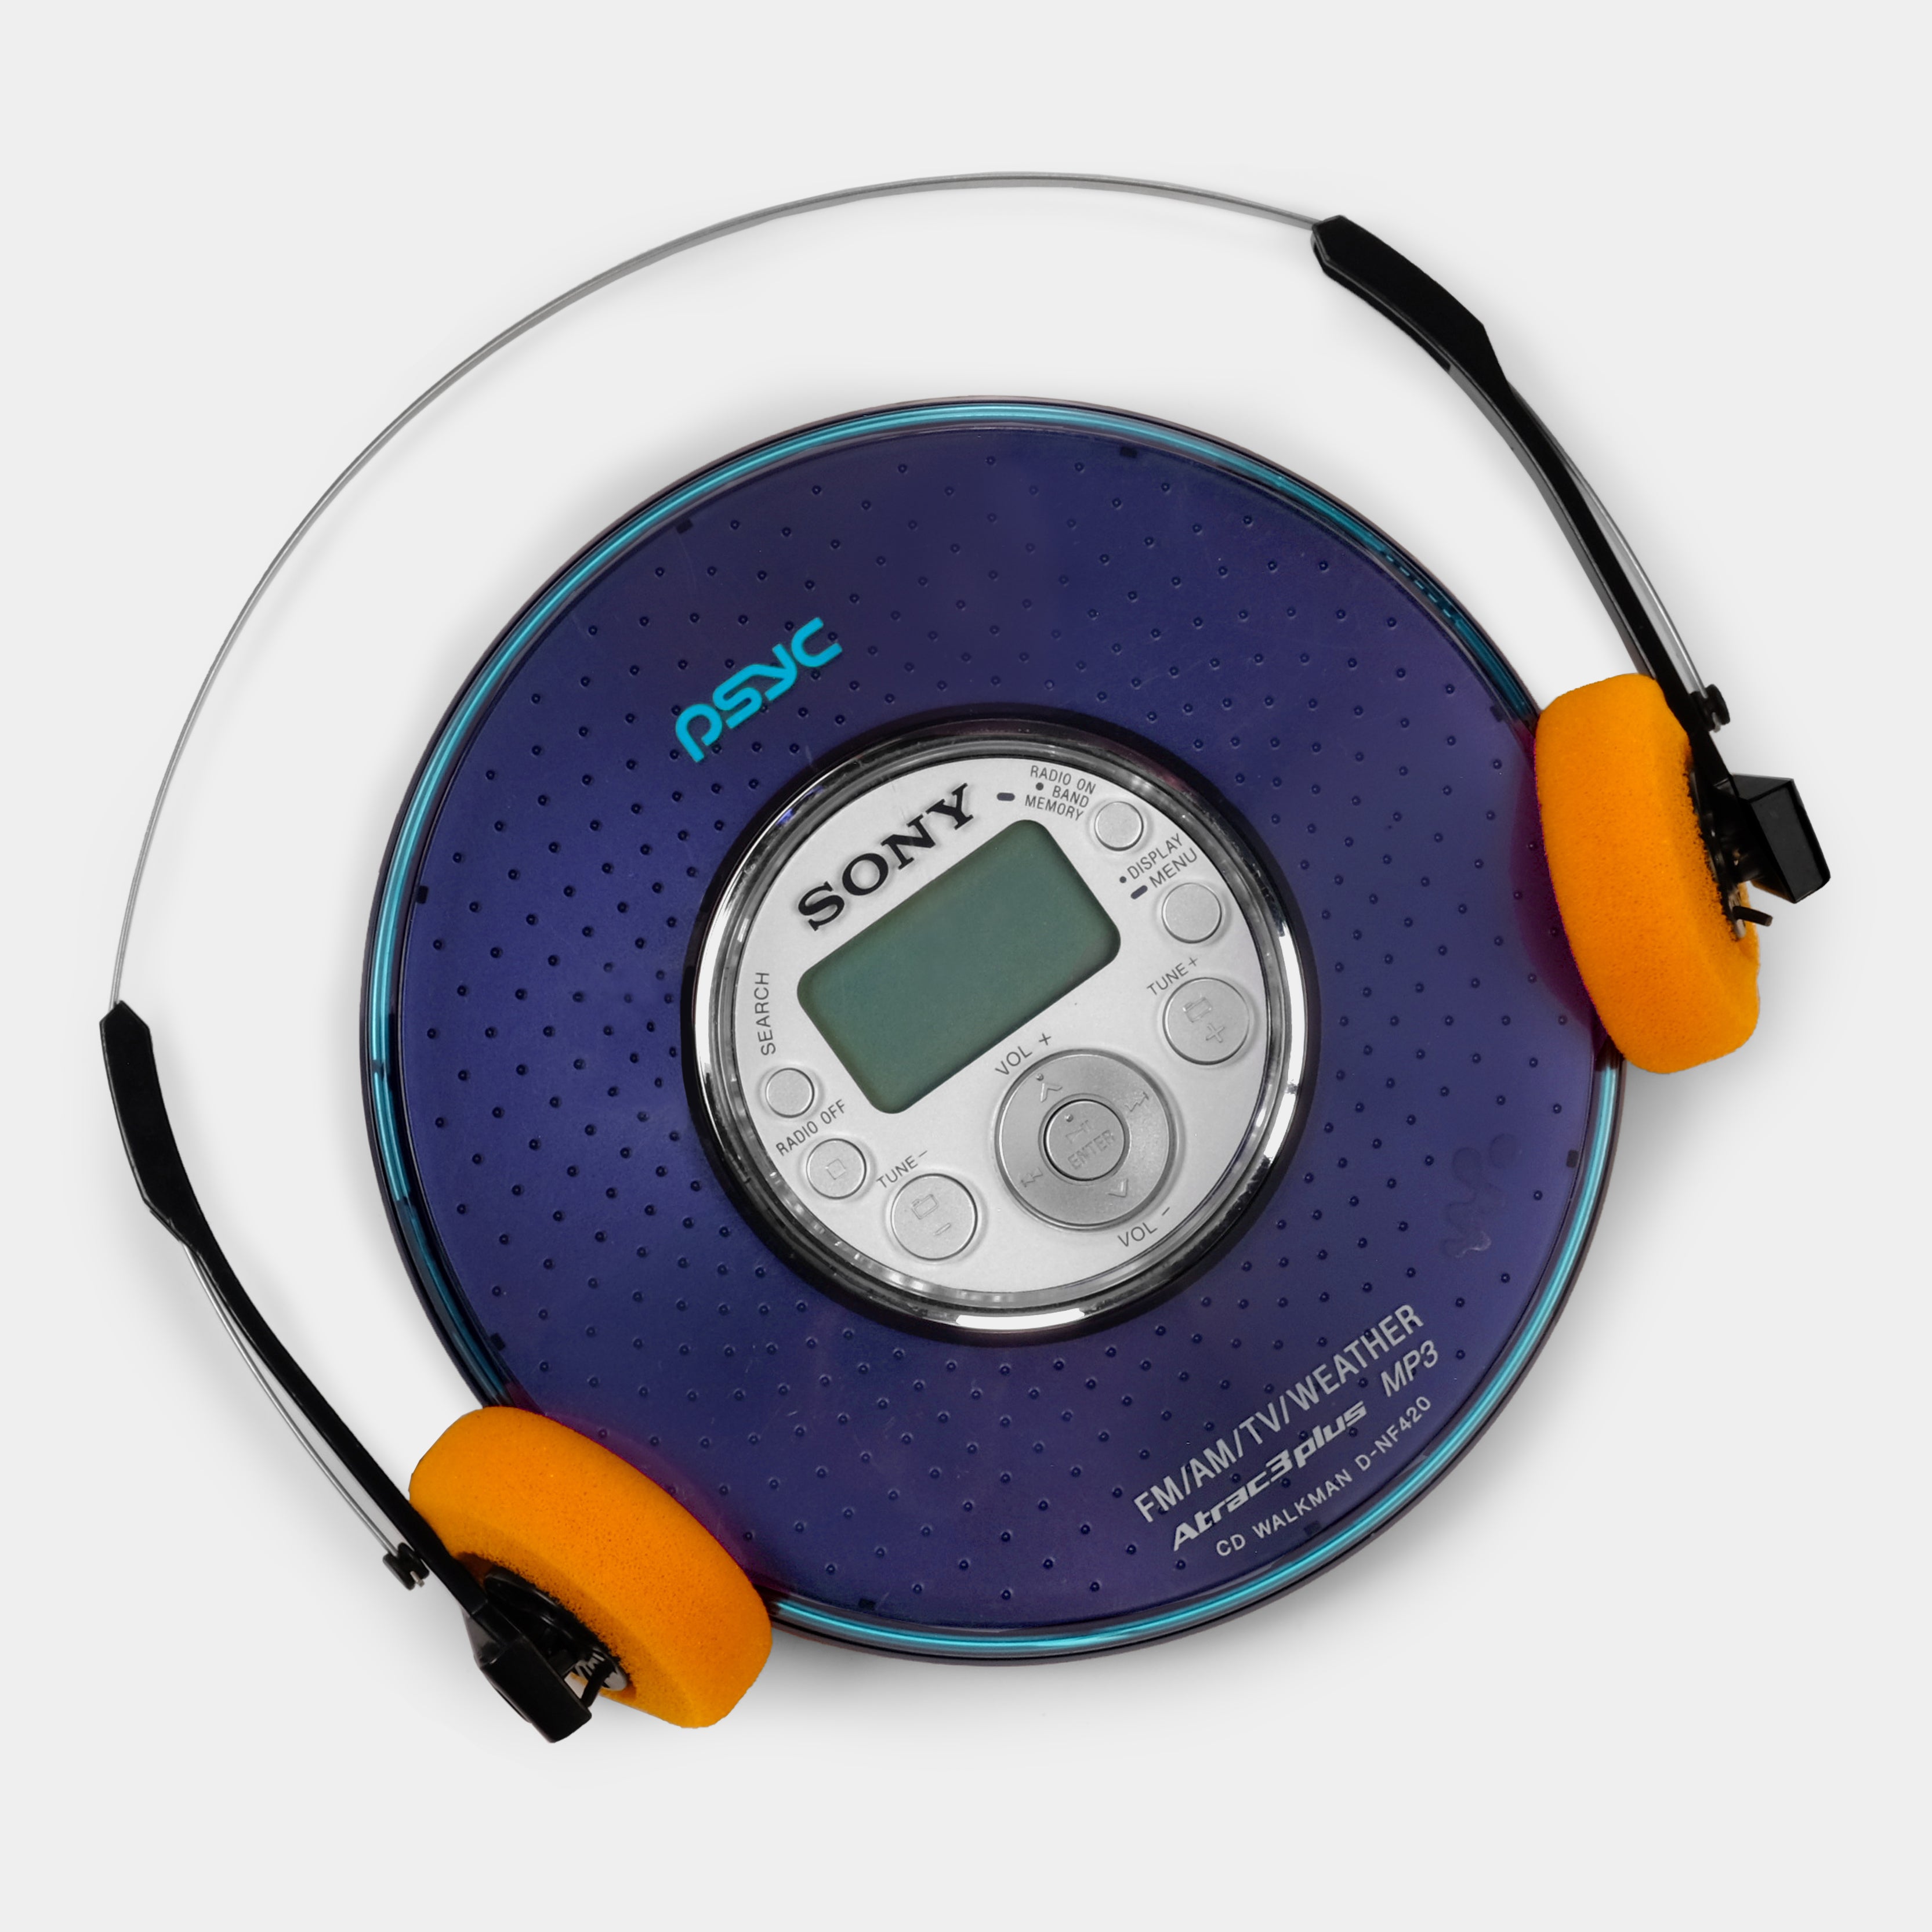 Sony Psyc D-NF420 Portable CD Player